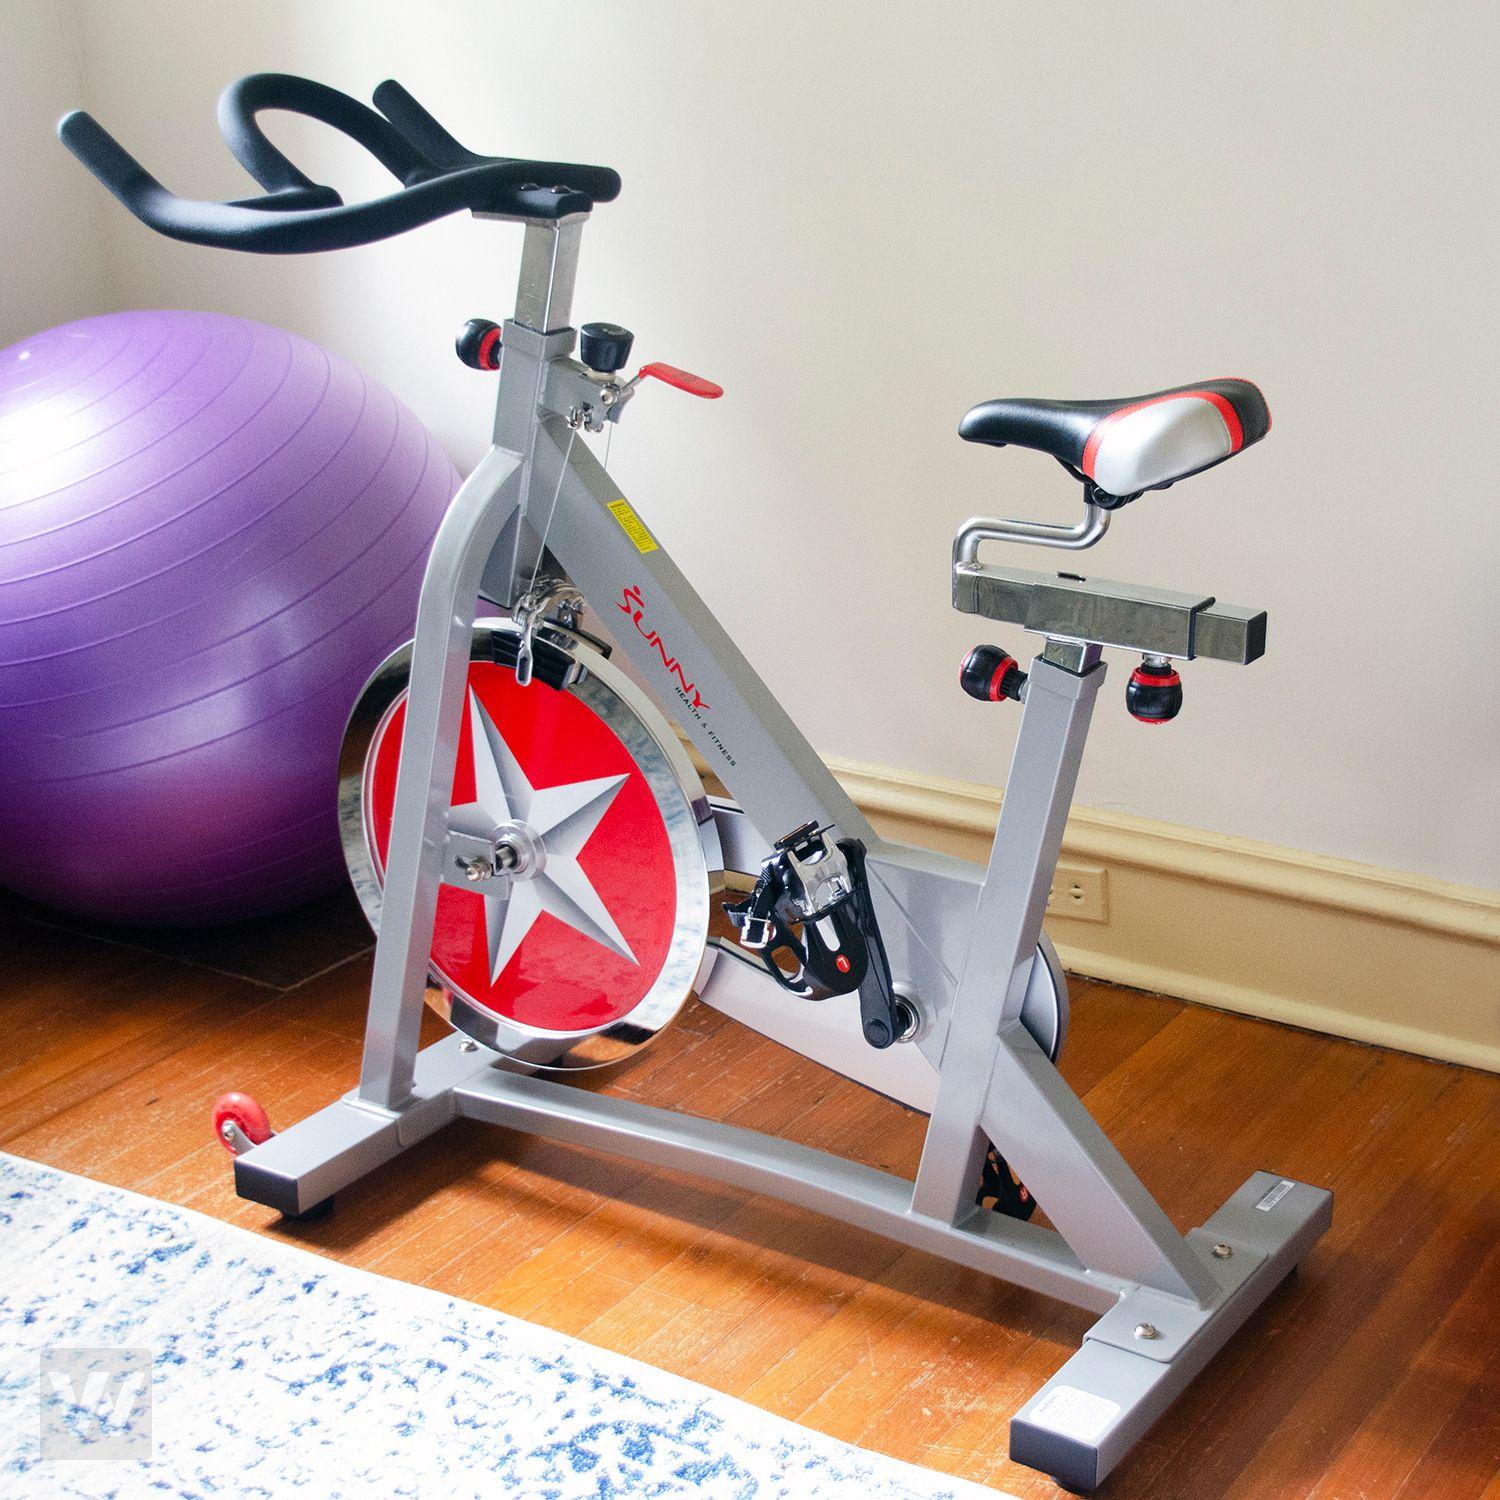 Sunny SF-B901 Pro Review: A No-Frills Indoor Cycling Bike